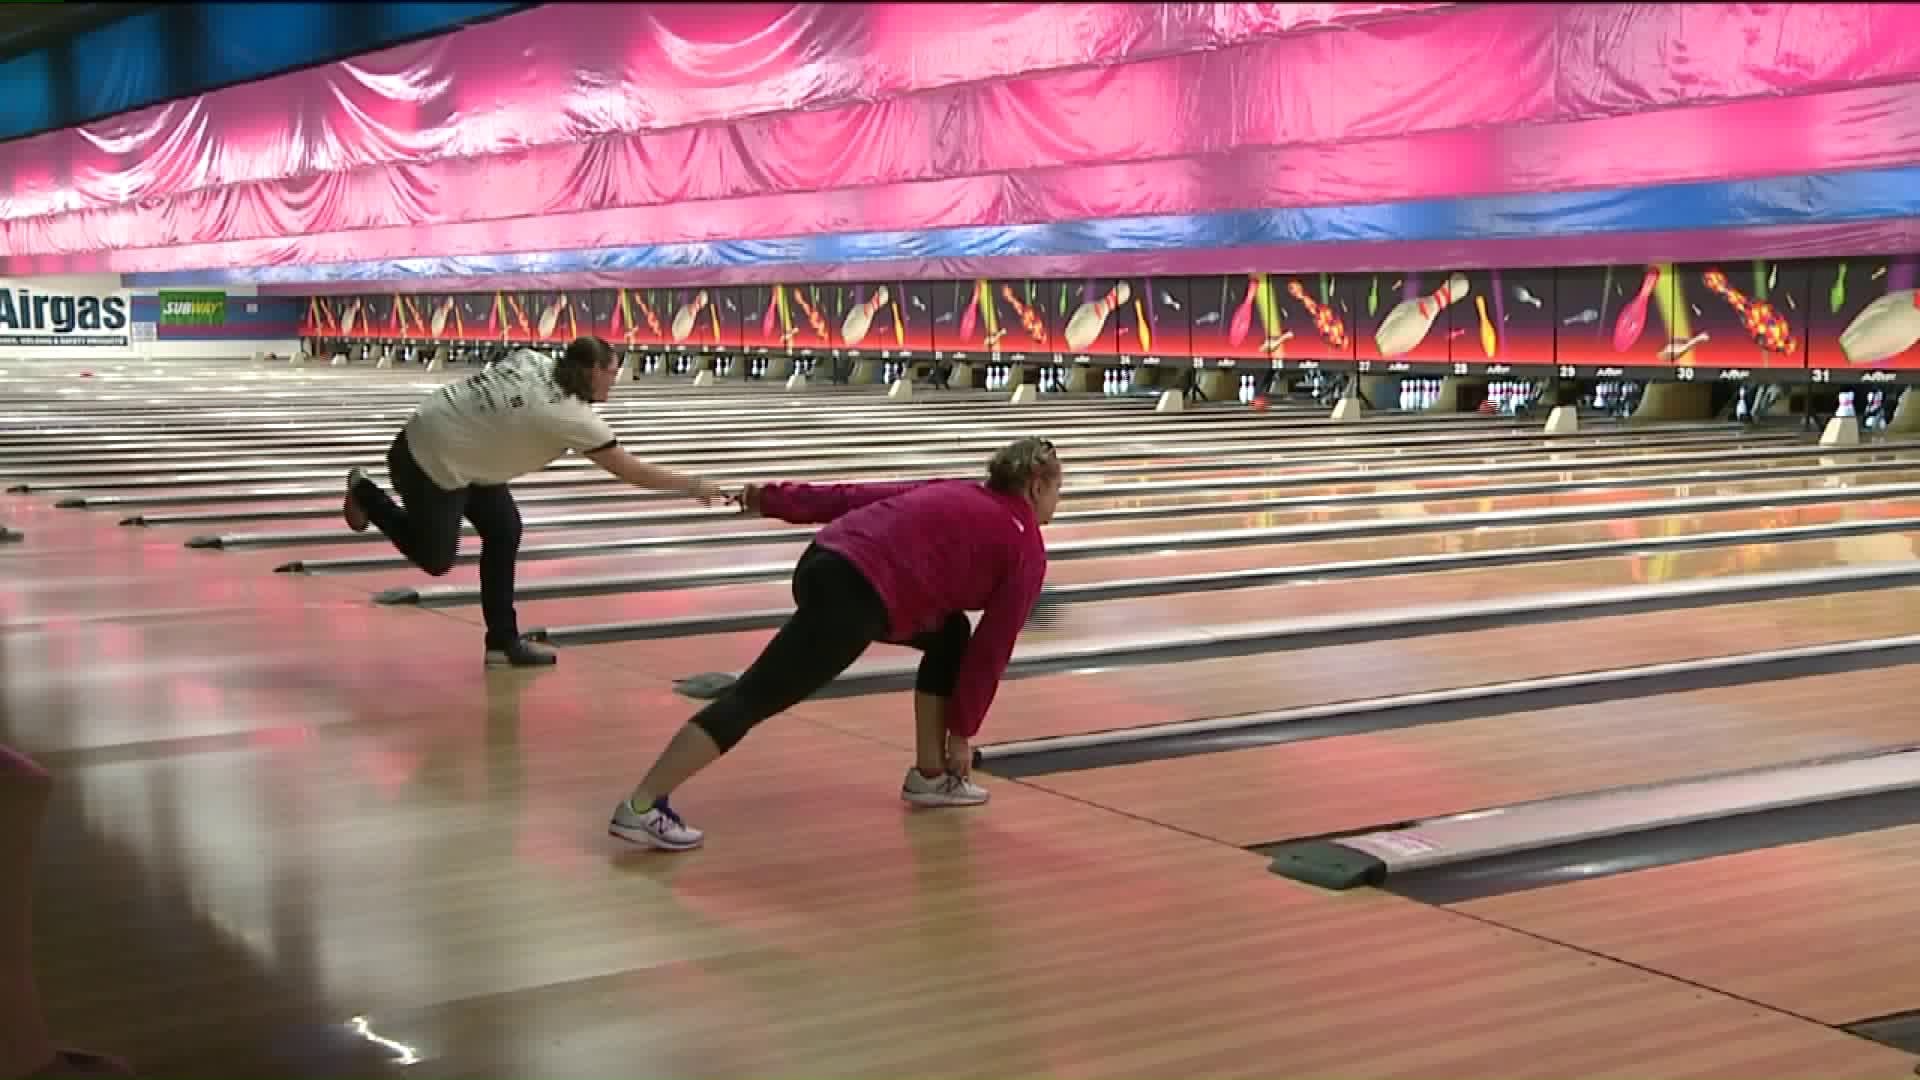 Knocking Down Pins to Fight Cancer